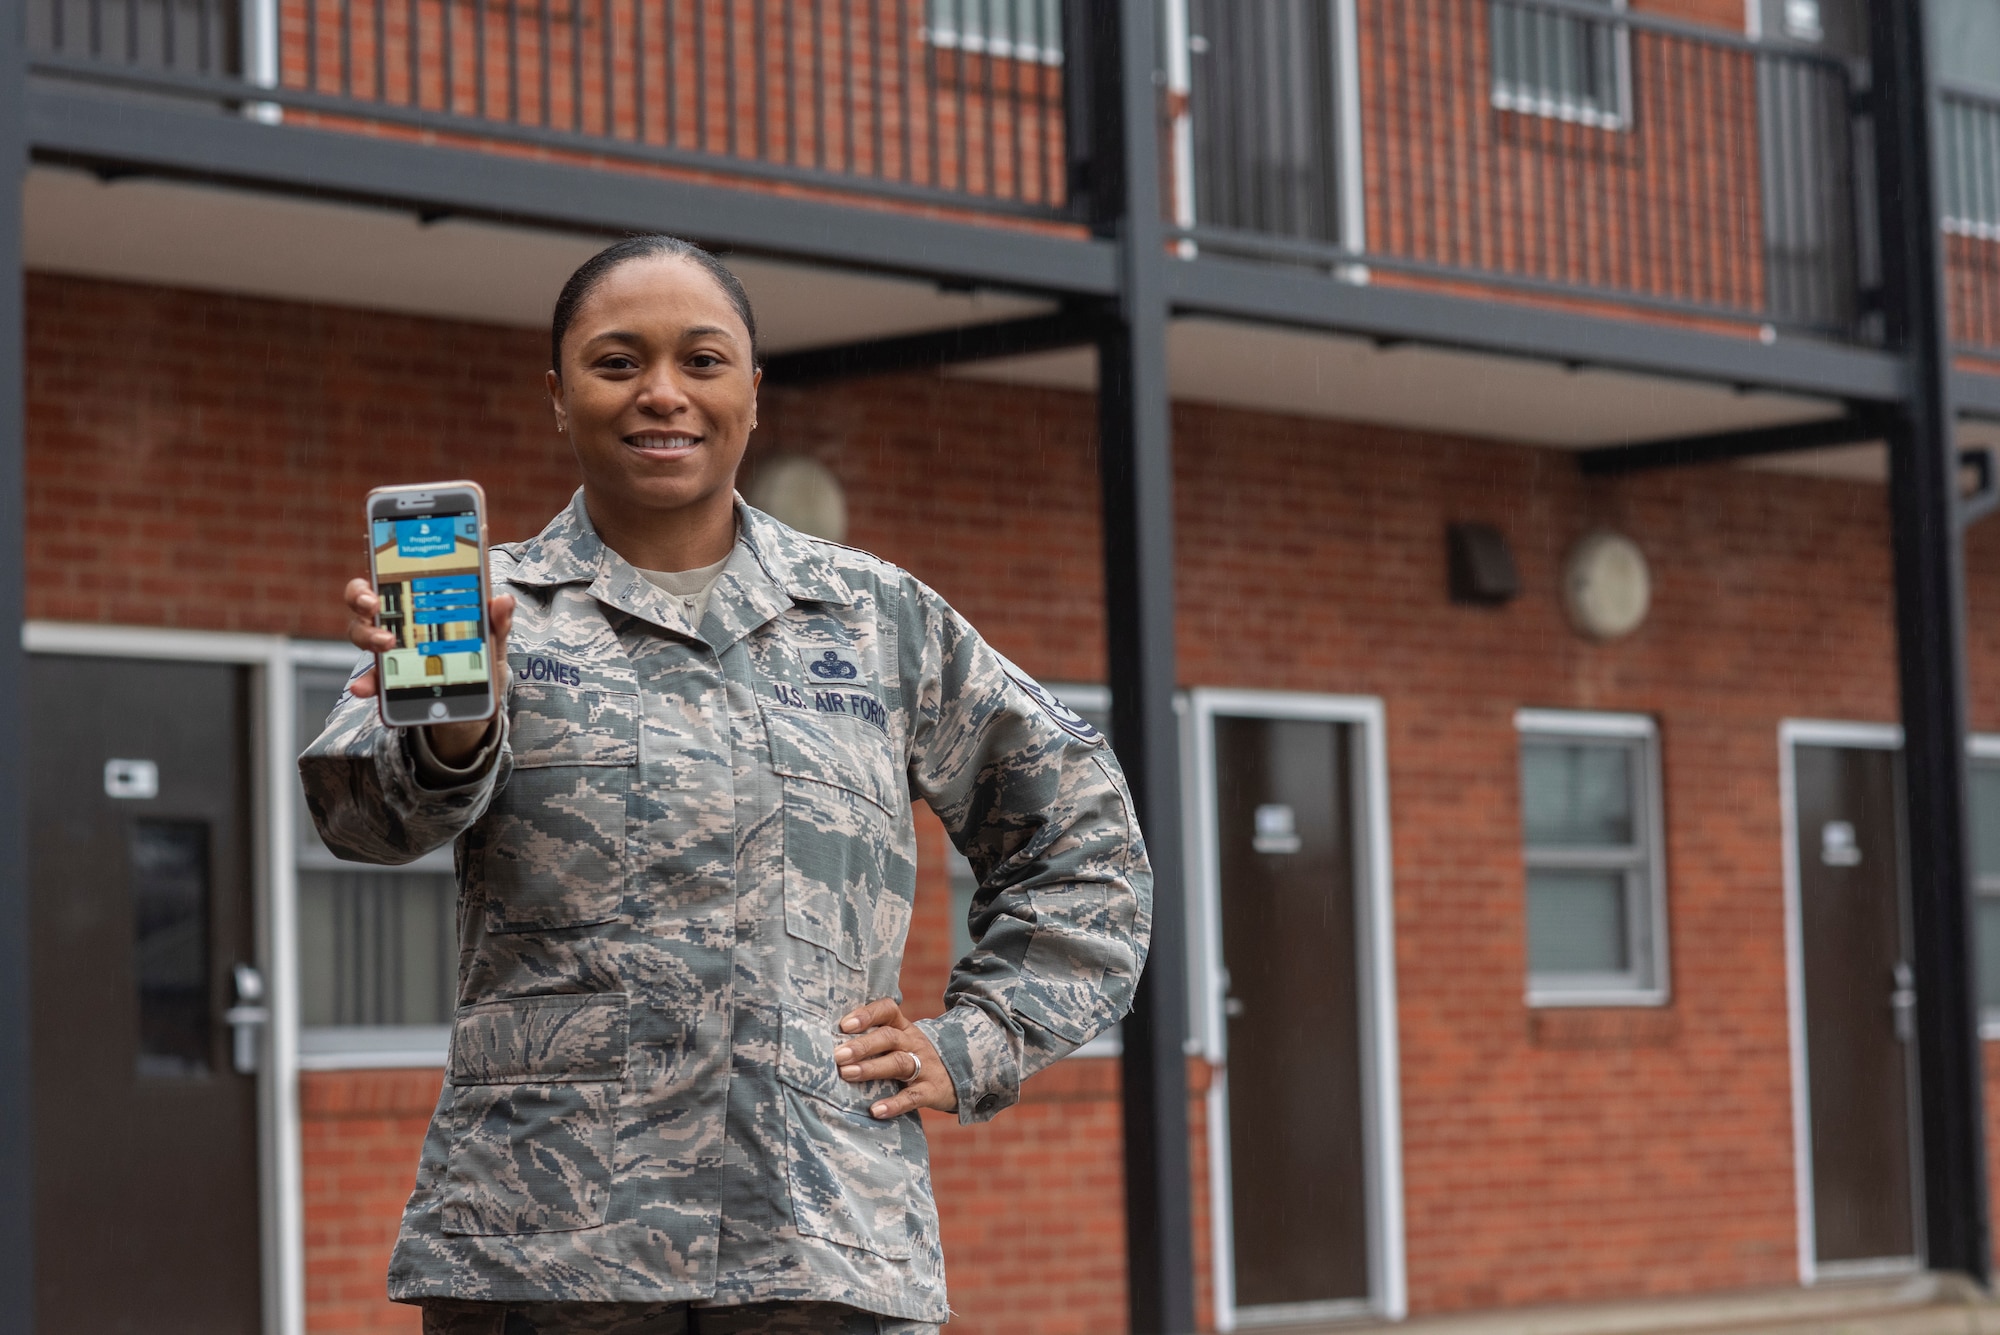 Master Sgt. Erika Jones, 100th Civil Engineer Squadron airmen dorm leader superintendent, displays the dorm app she designed at RAF Mildenhall, England, Dec. 17, 2019. Airmen living in the dorms can benefit from the improved process the app provides for submitting work order requests. (U.S. Air Force photo by Airman 1st Class Joseph Barron)